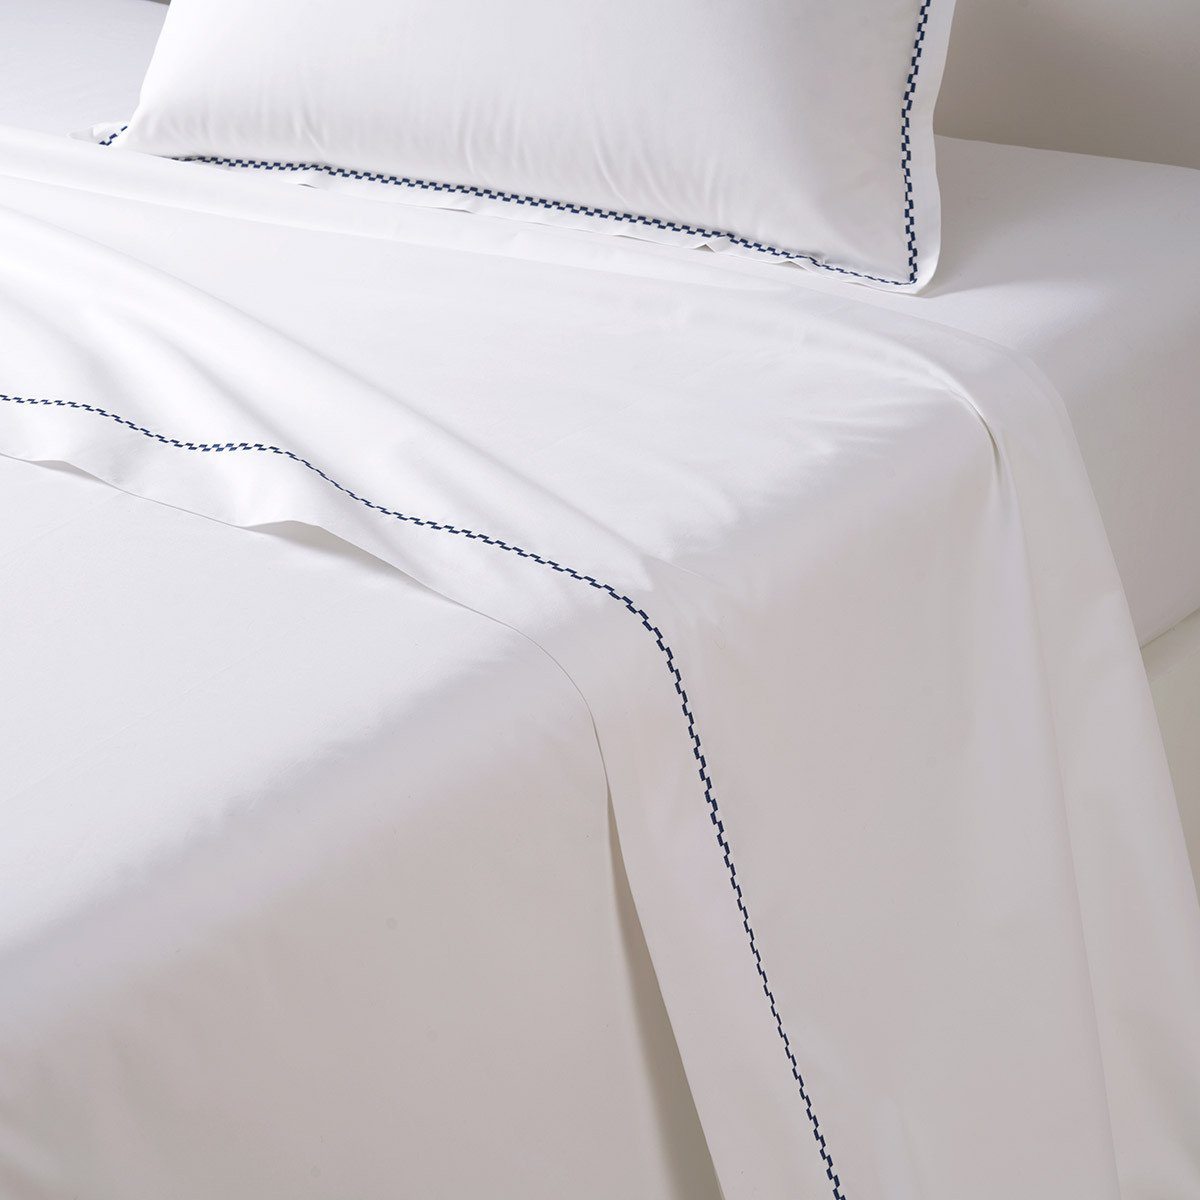 Fig Linens - Alienor Outremer Bedding by Yves Delorme - Sheets and Shams